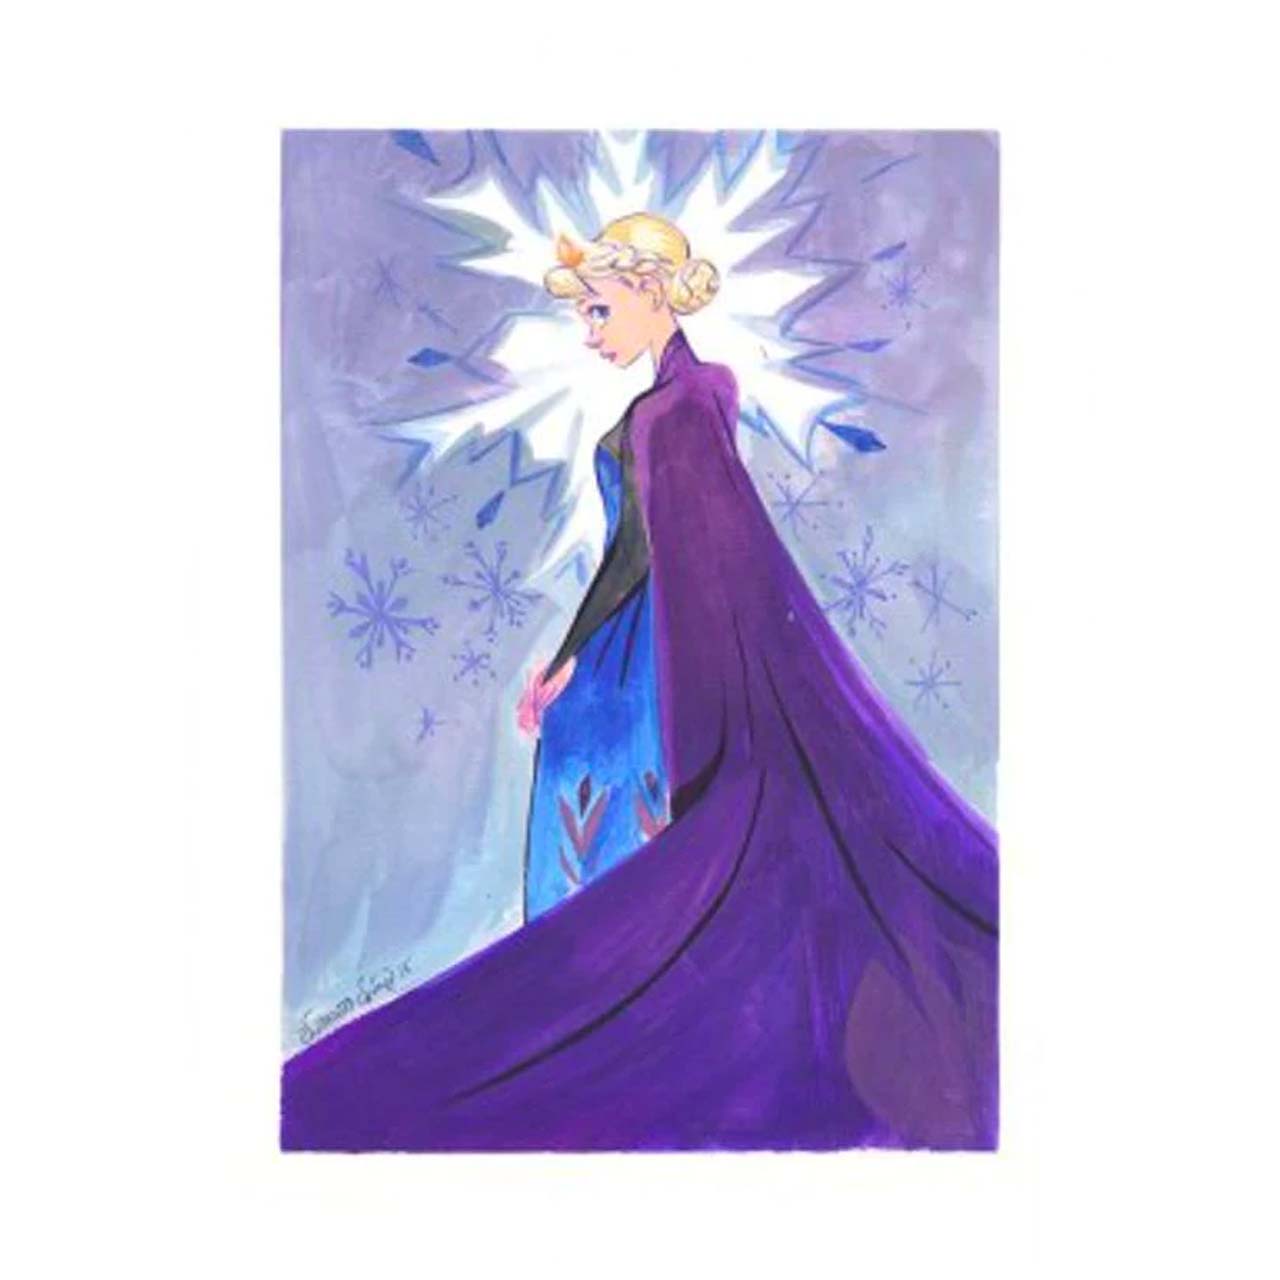 Victoria Ying Disney "Snow Queen" Limited Edition Giclee